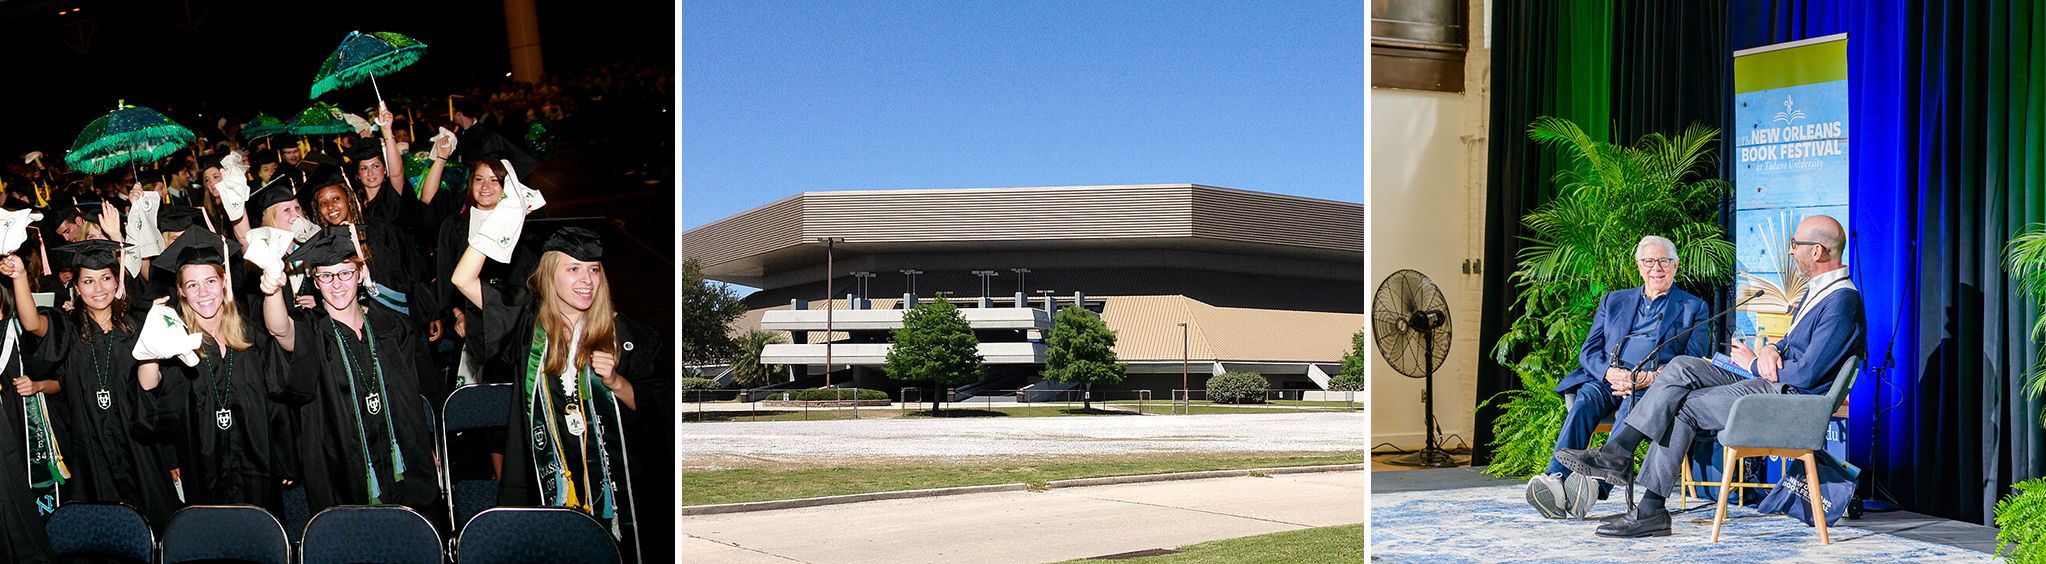 UNO Lakefront Arena in New Orleans